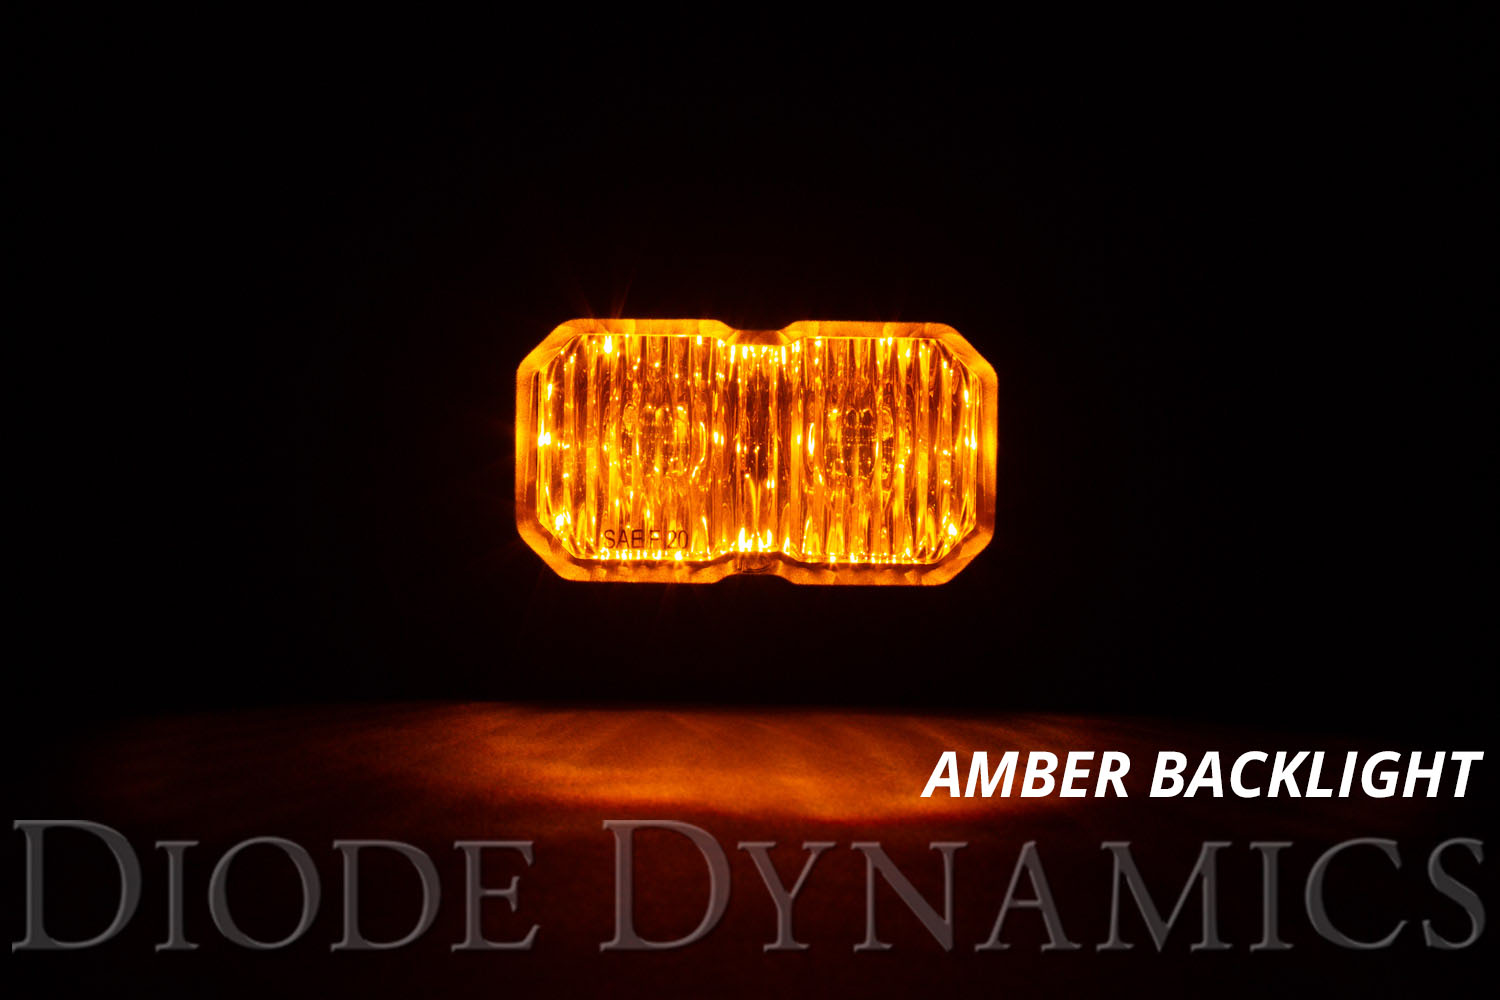 Diode Dynamics Stage Series 2 Inch LED Pod, Pro Yellow Spot Standard ABL Pair